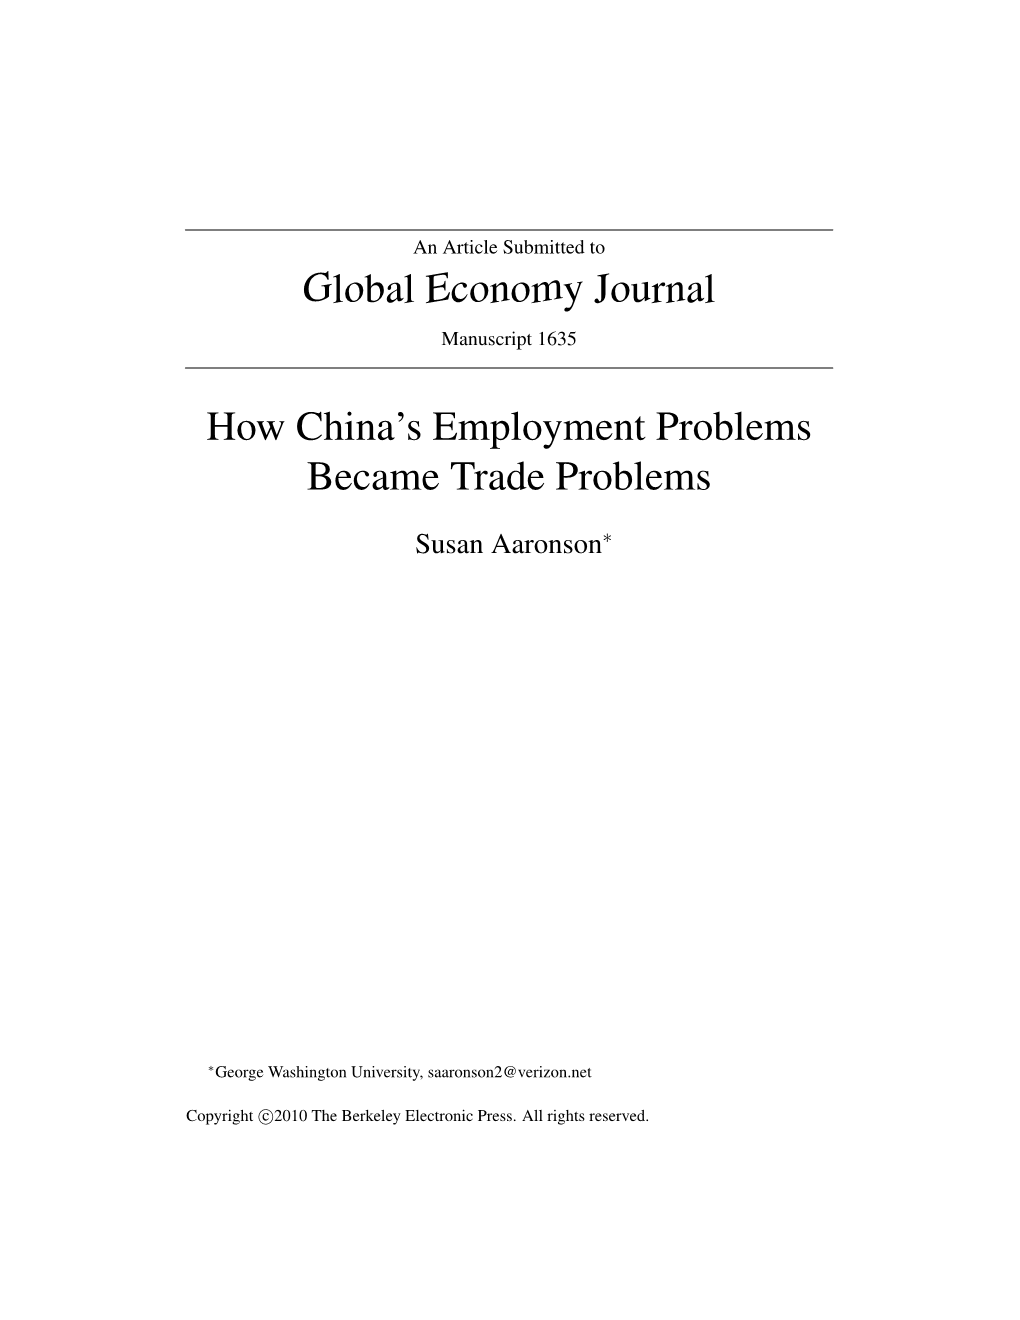 Global Economy Journal How China's Employment Problems Became